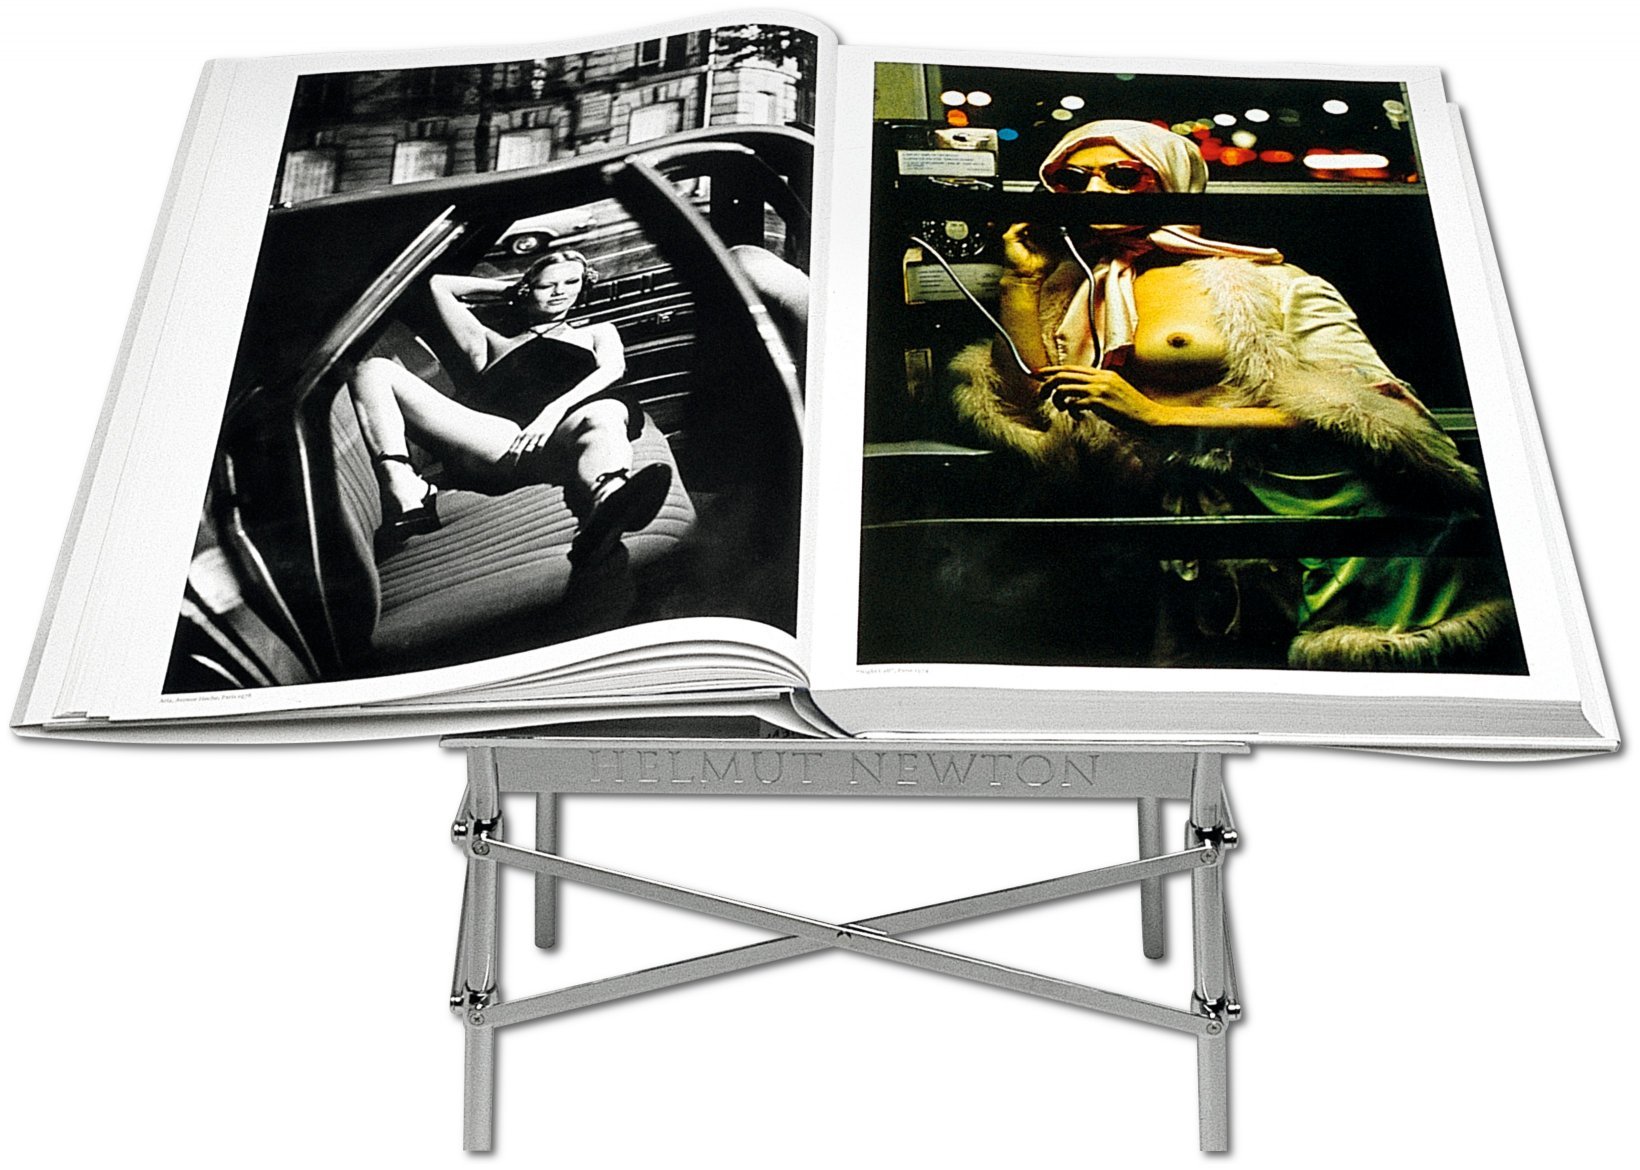 Helmut Newton: SUMO<br />Edition of 10,000<br />Helmut Newton, Philippe Starck<br />Hardcover with book stand, <br />50 x 70 cm, 464 pages<br />TASCHEN